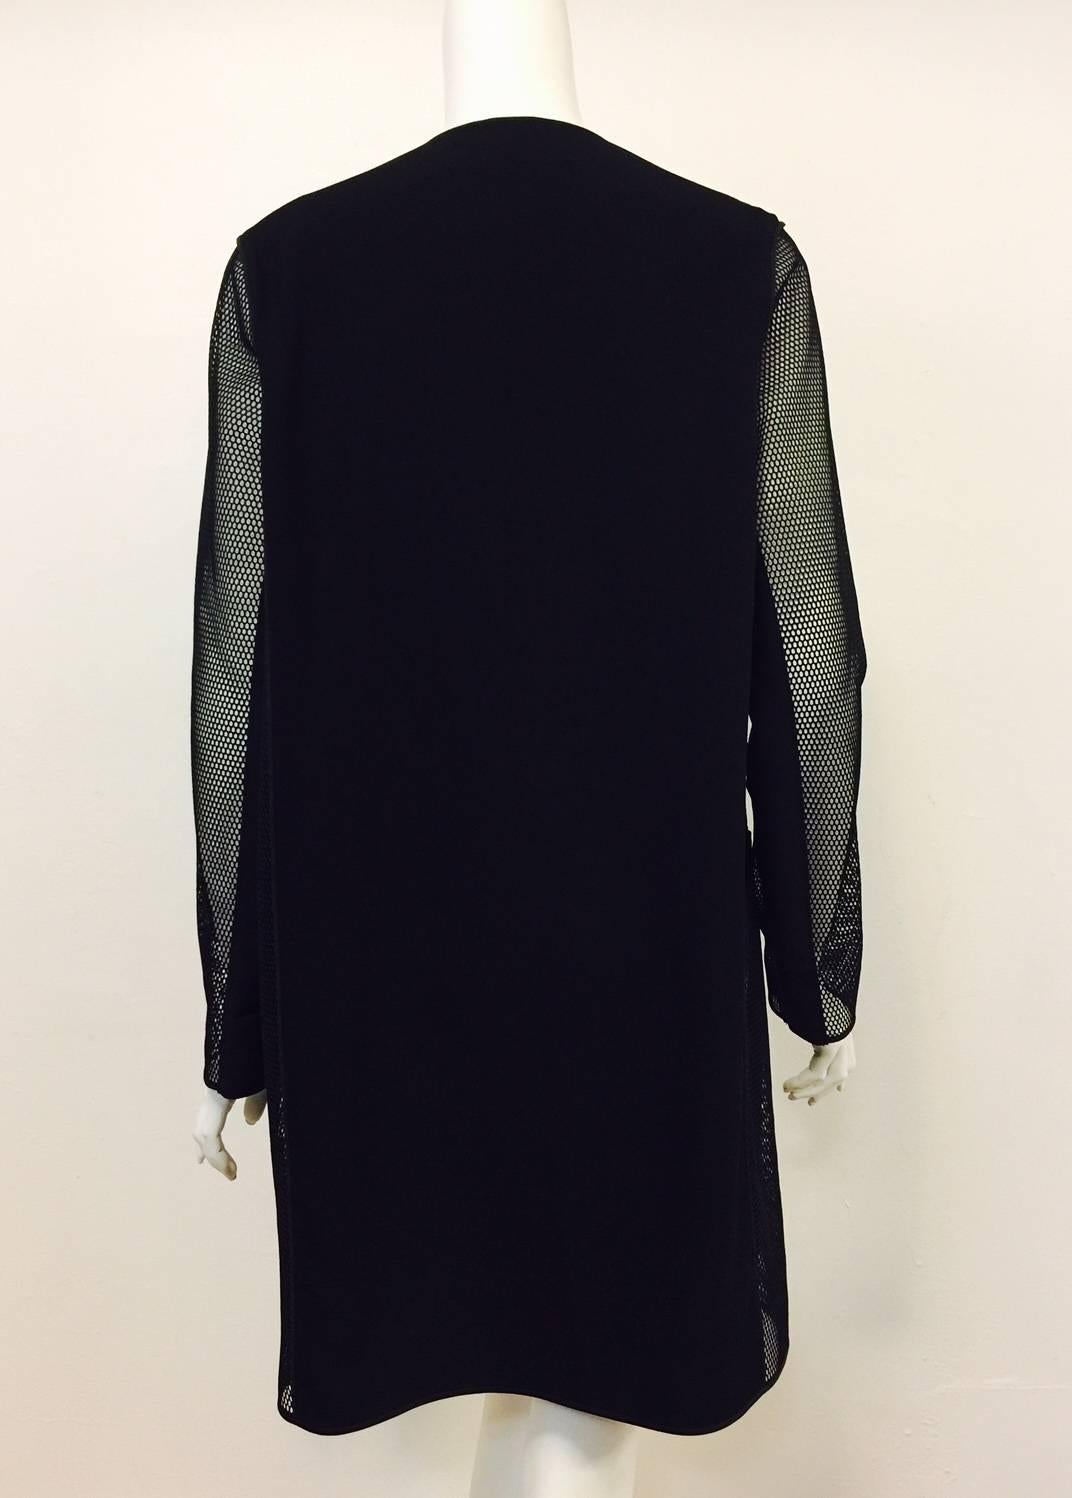 Black Elie Tahari Modern Knee-Length Coat With Abstract Print Front and Net Panels